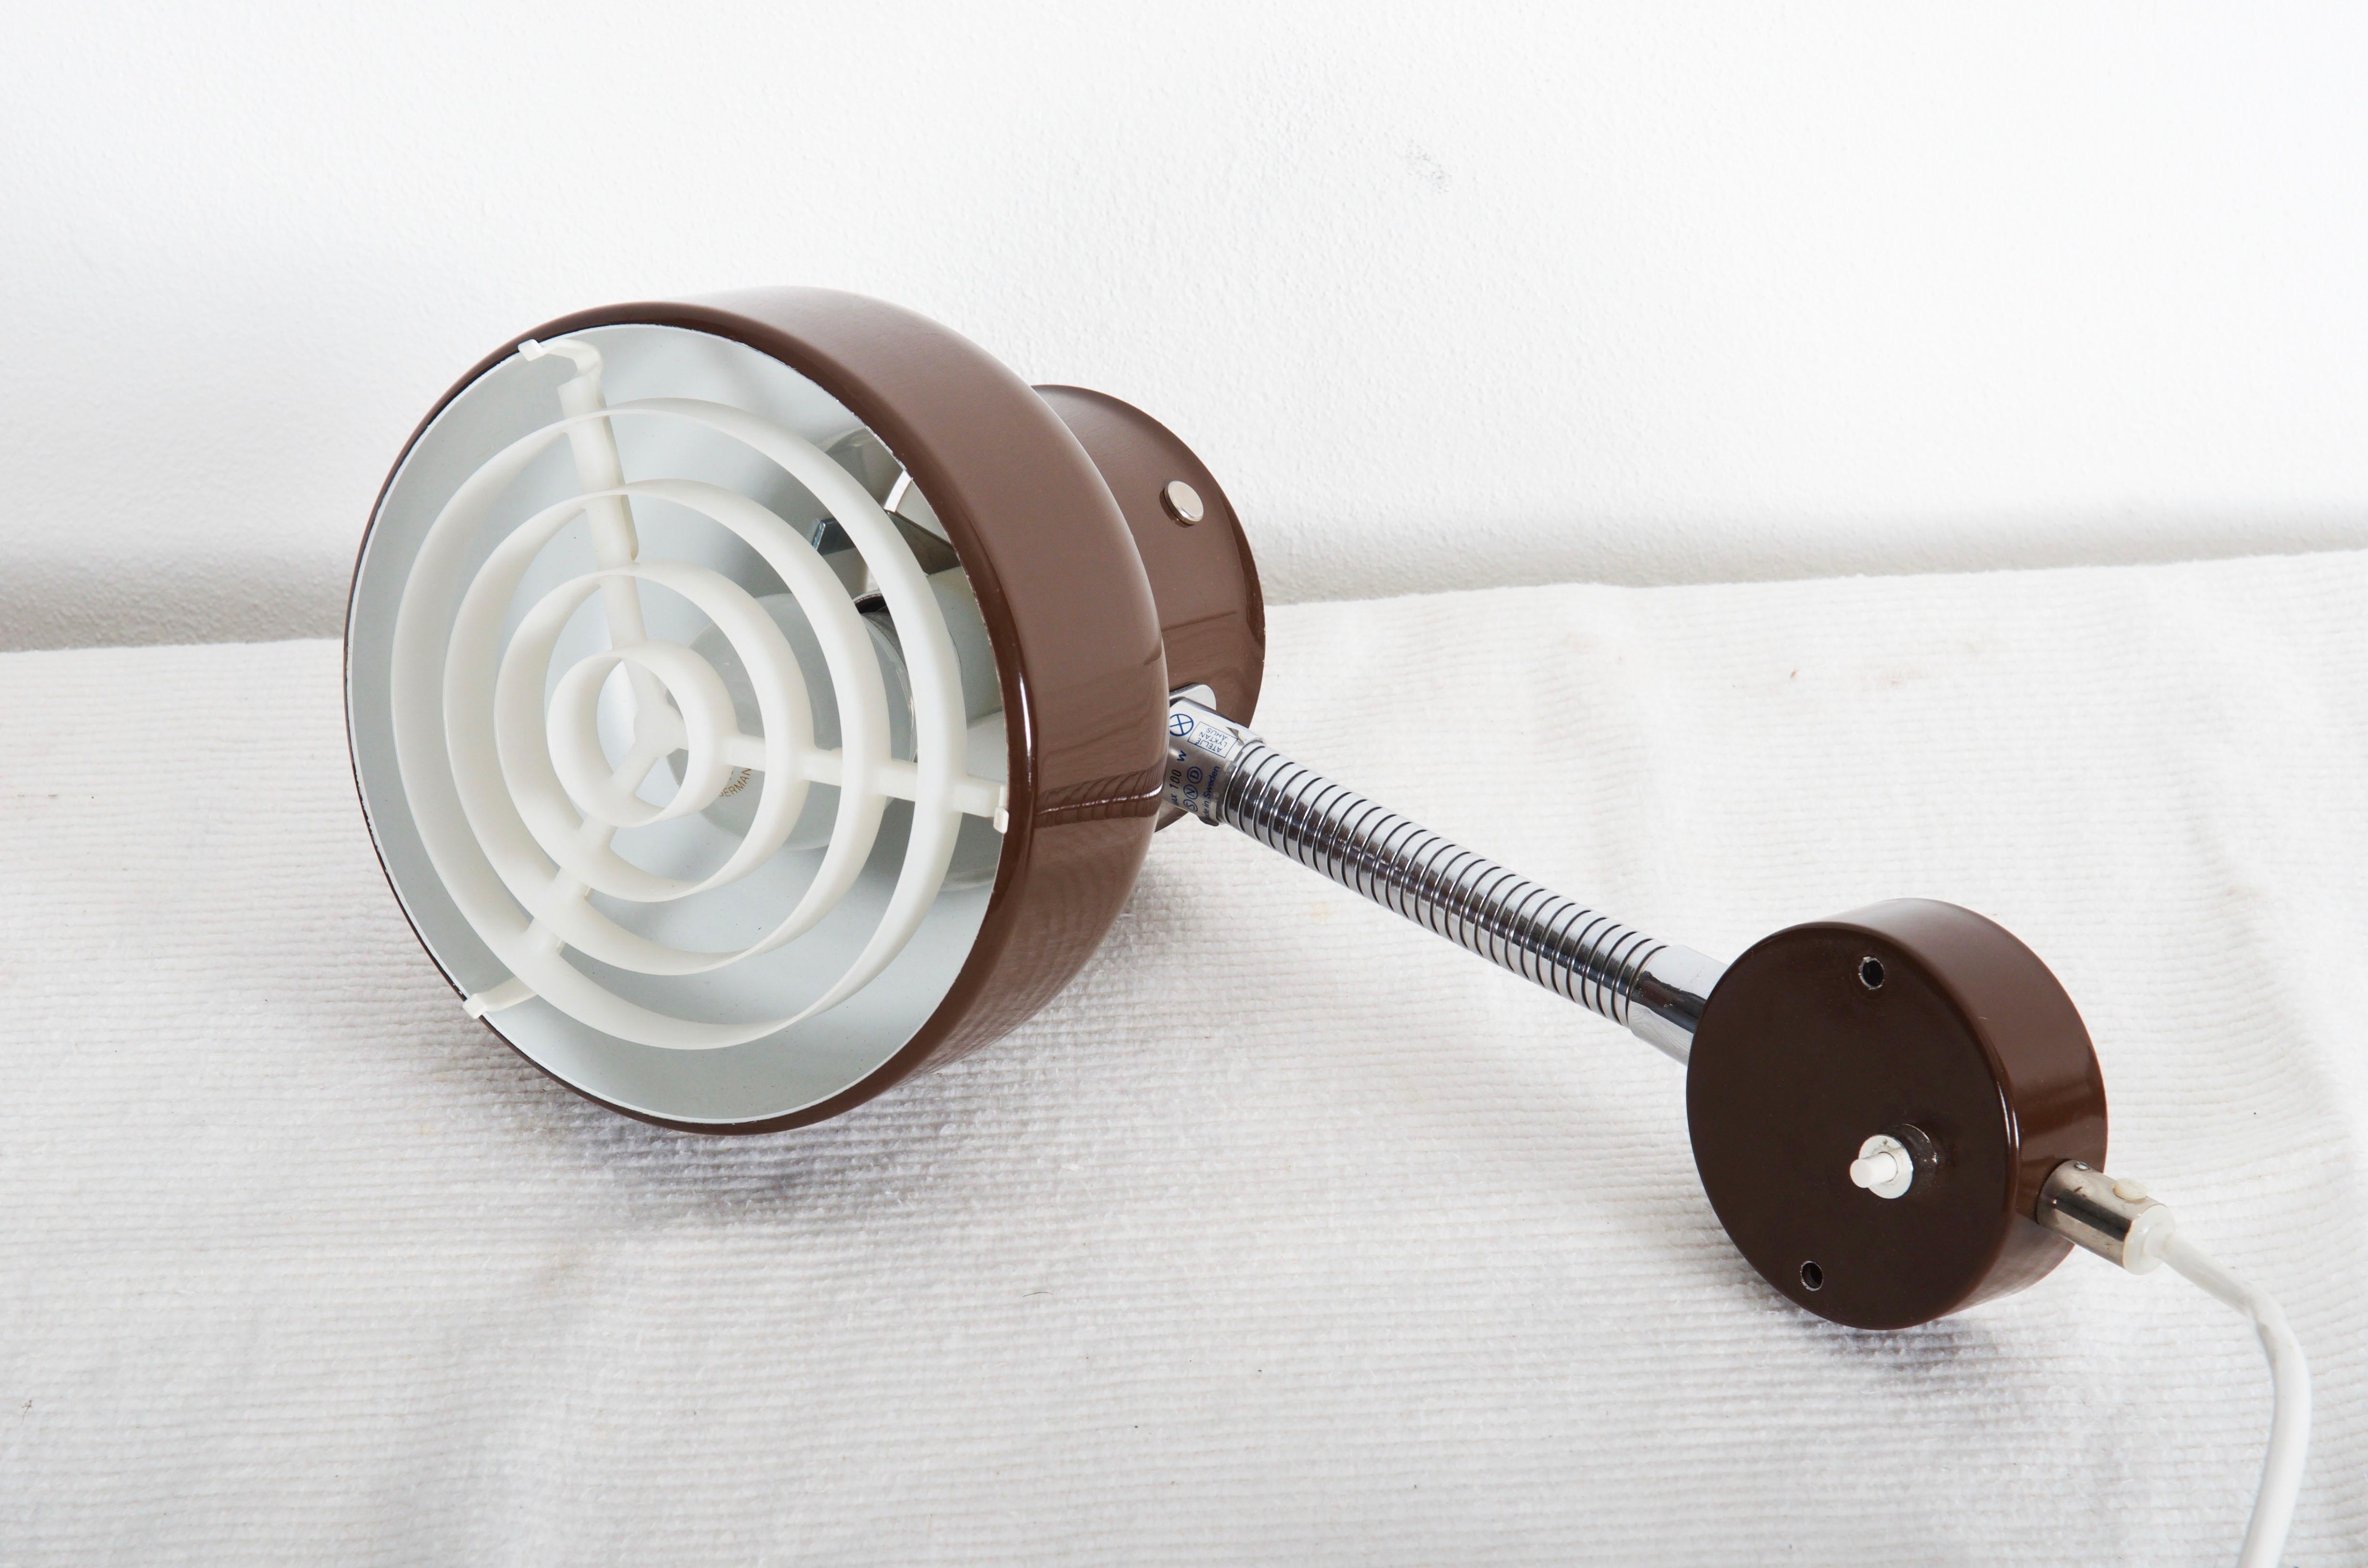 Brown Bumling' wall light by Anders Pehrson for Atelje´ Lyktan from 1960s.